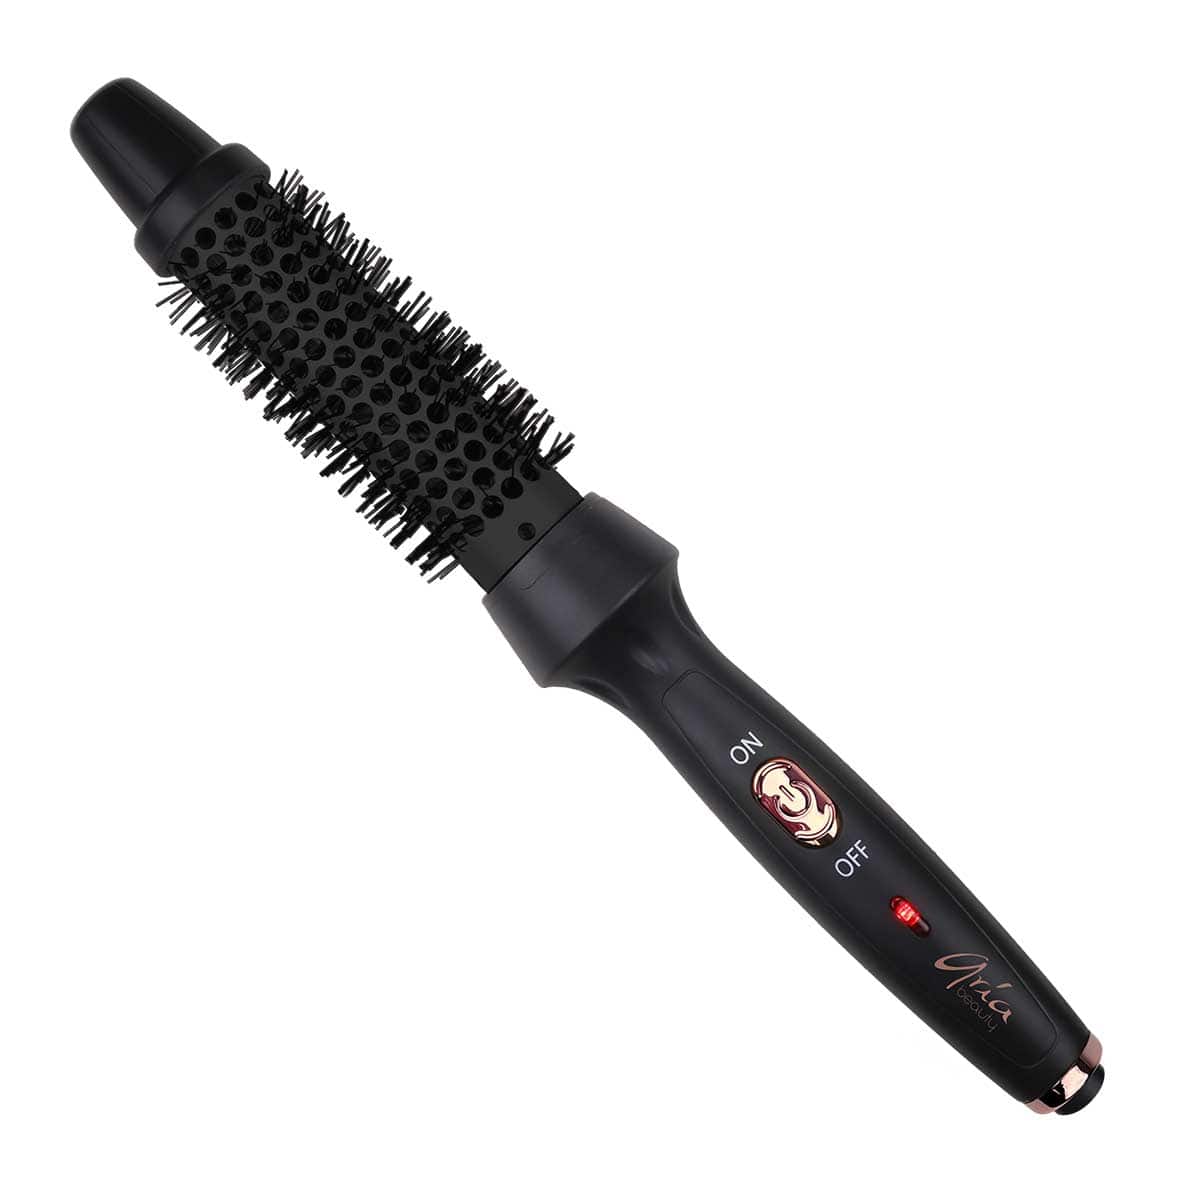 Ariabeauty Curling Wands / Curling Irons 1.2" Thermal Ionic Styling Brush